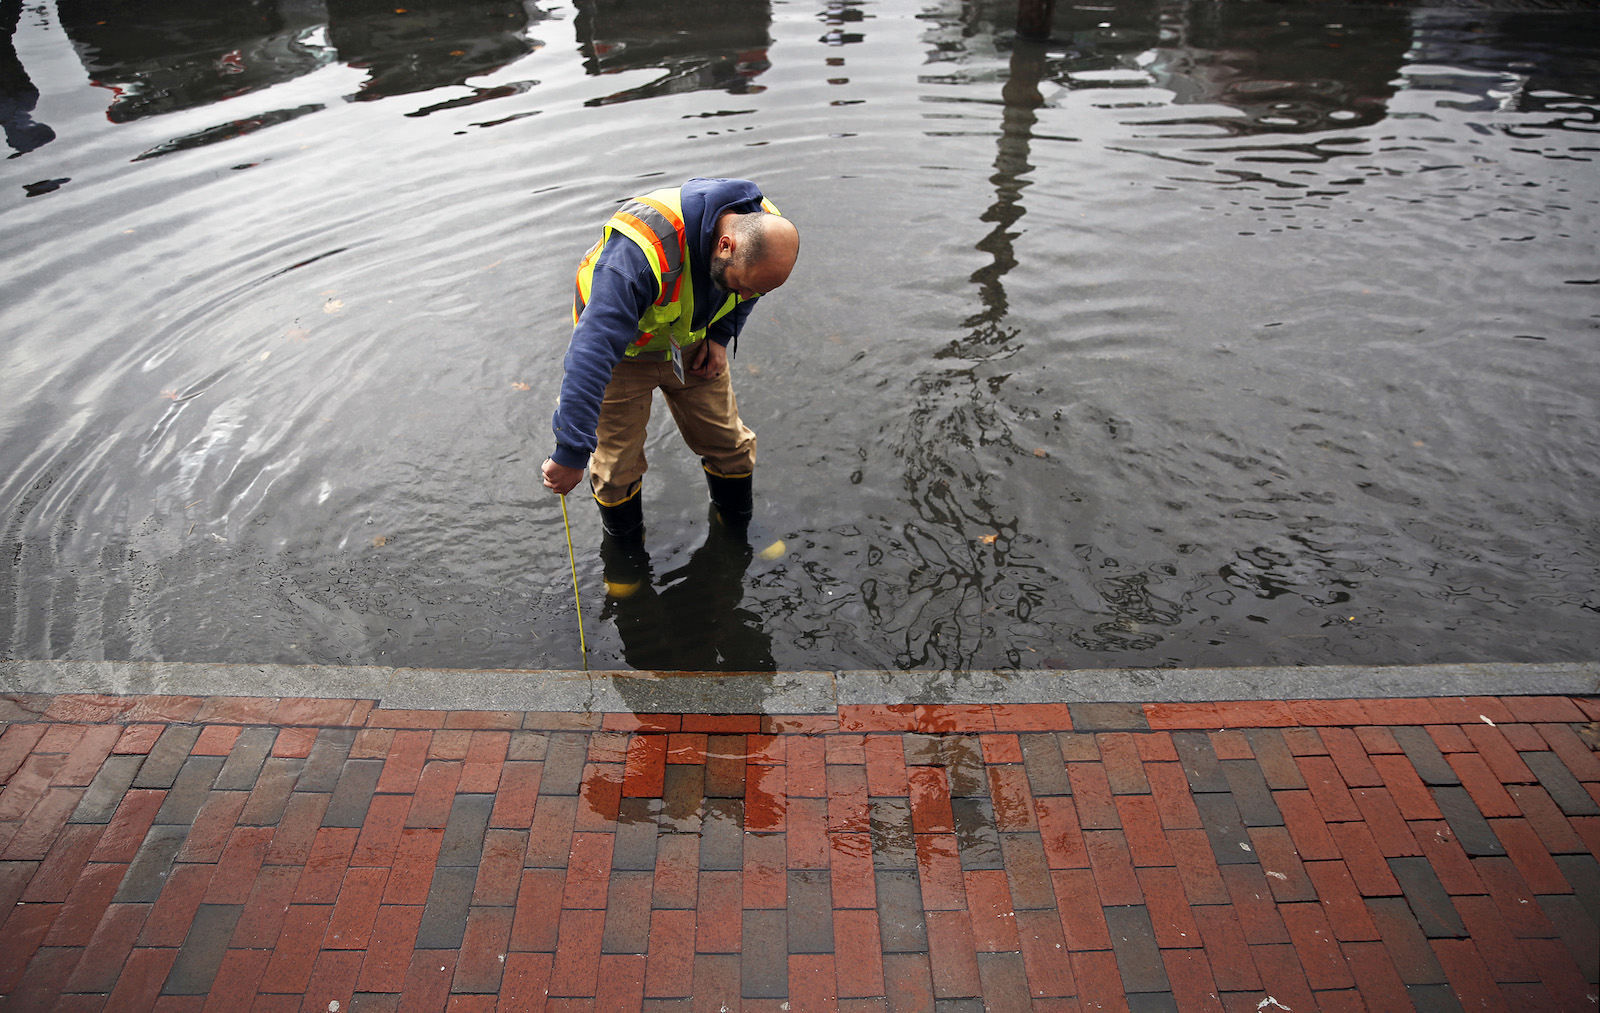 man in yellow construction vest bends over street flooded with water measuring depth with ruler. Bottom of the screen is red brick road